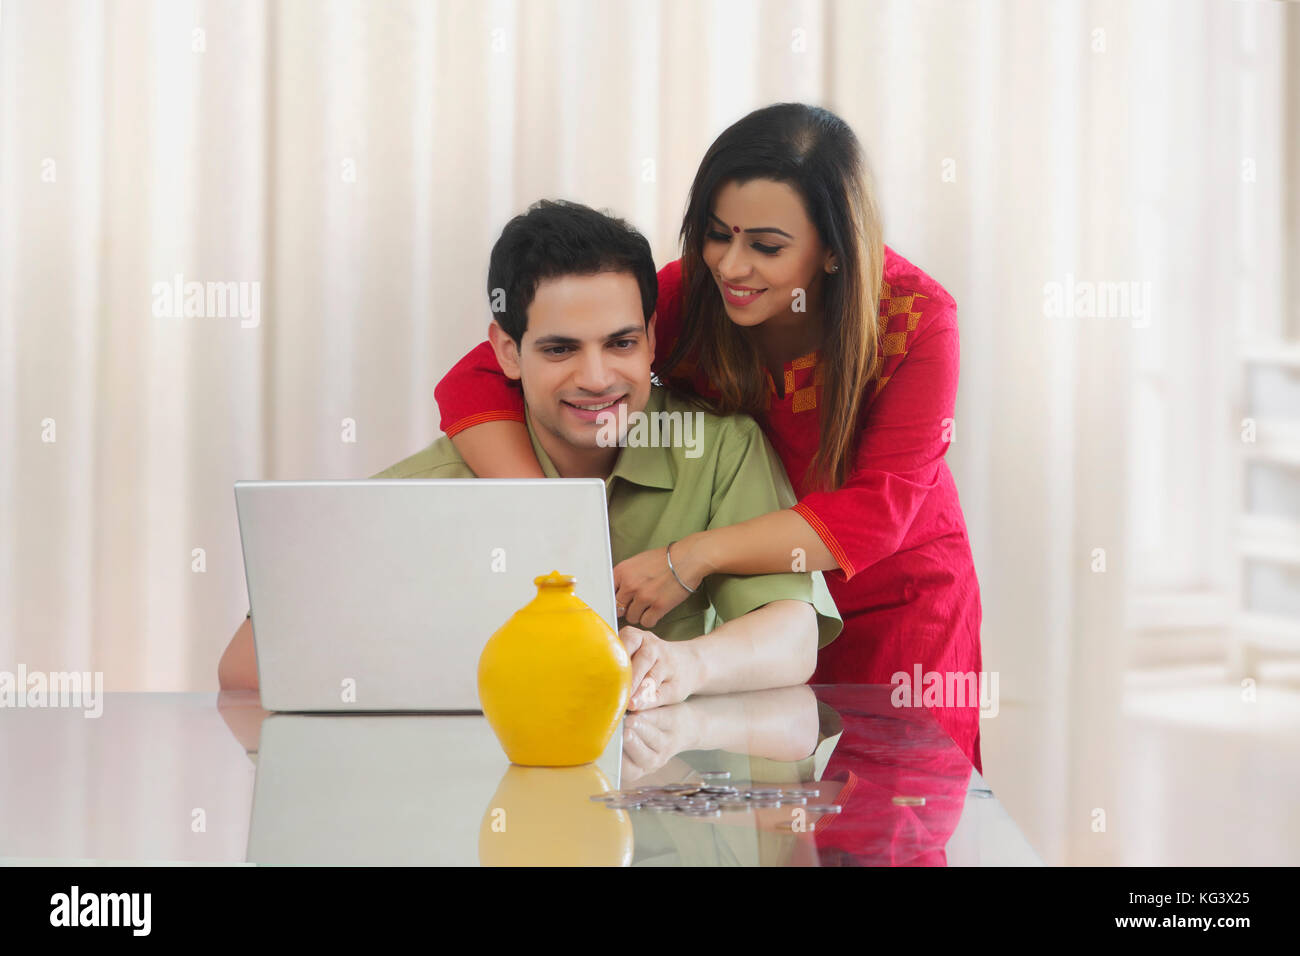 Couple looking at laptop with coins and piggy bank on table Stock Photo